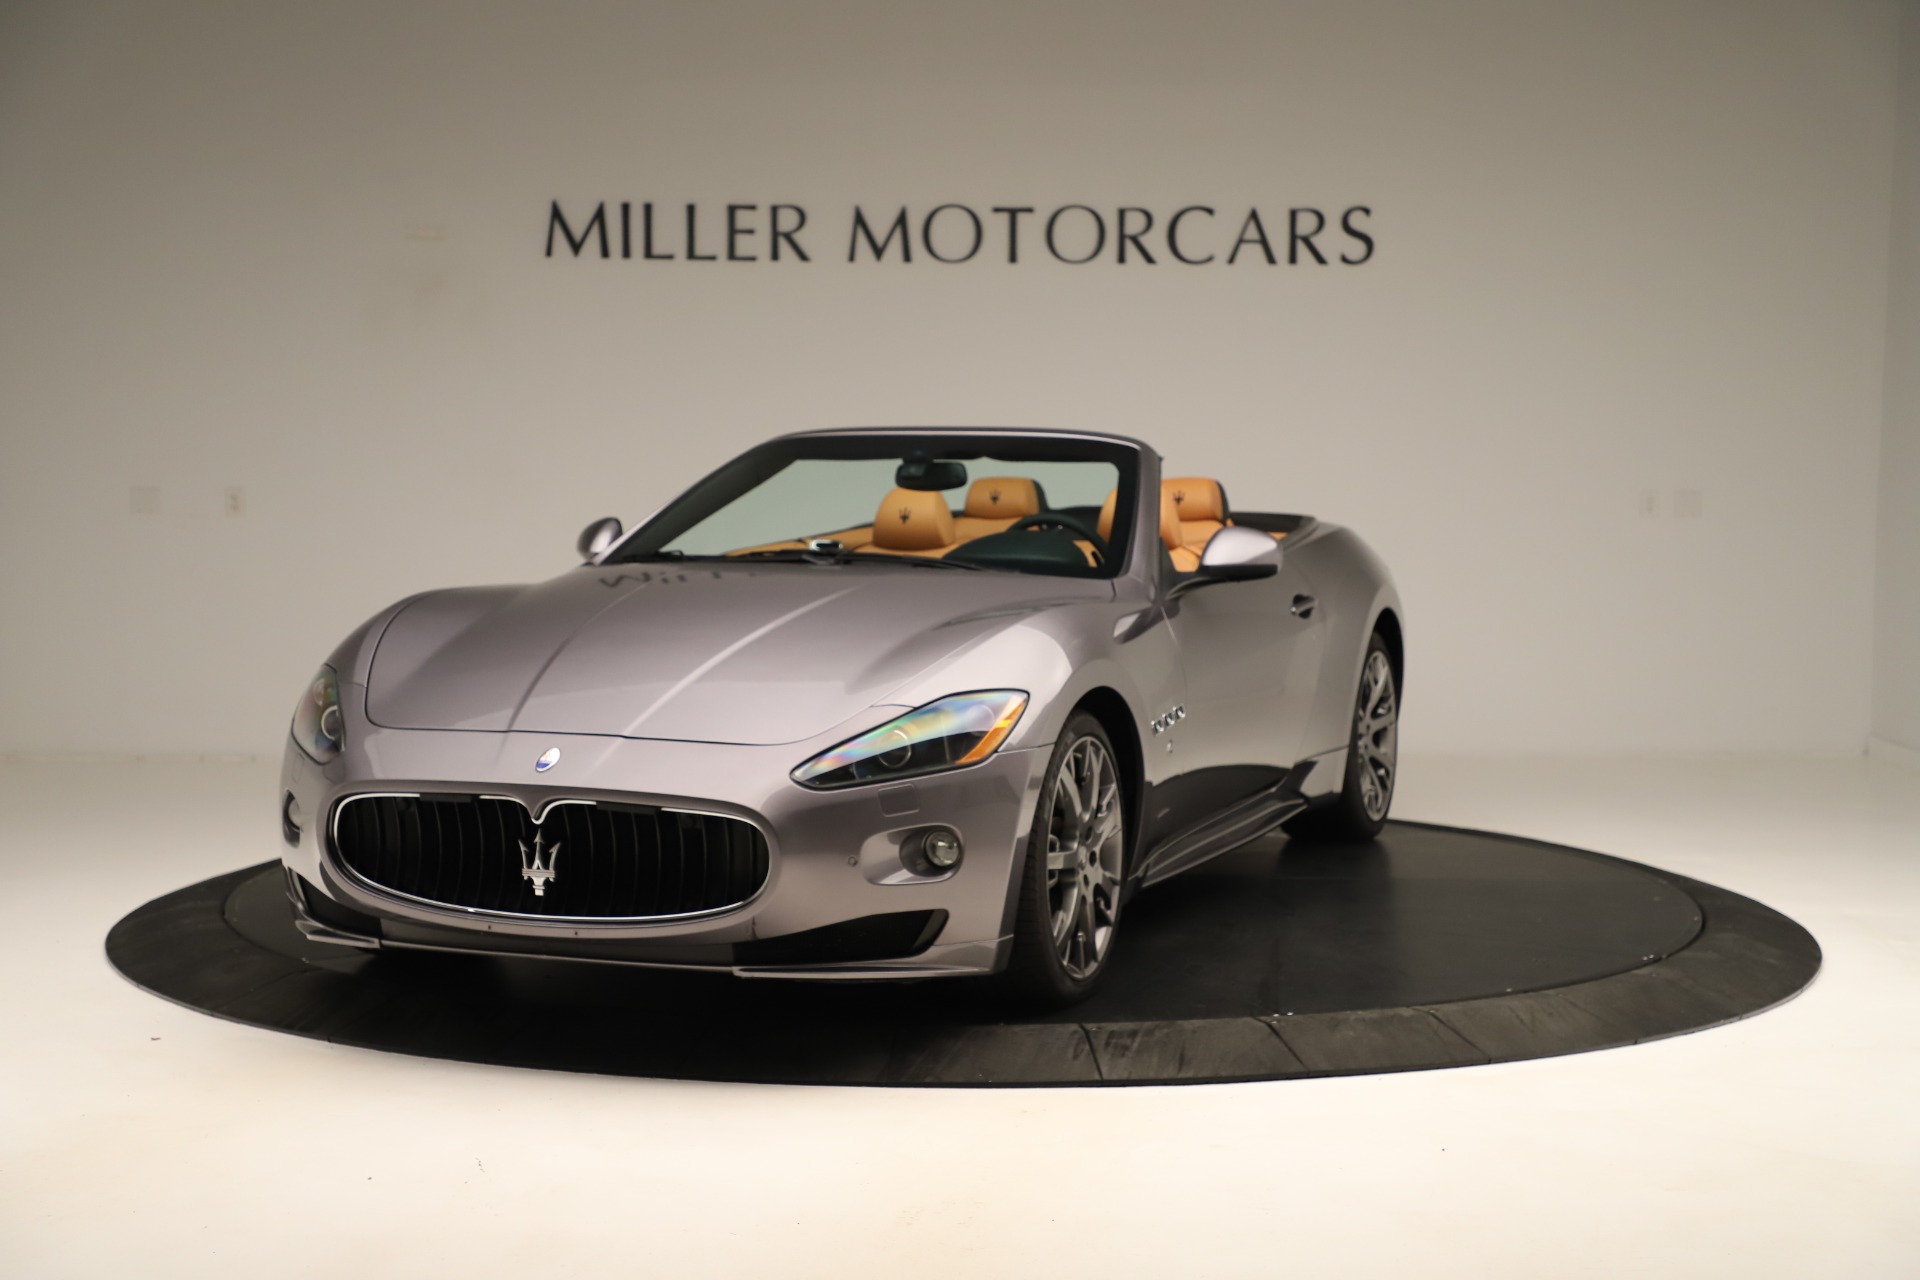 Used 2012 Maserati GranTurismo Sport for sale Sold at Rolls-Royce Motor Cars Greenwich in Greenwich CT 06830 1